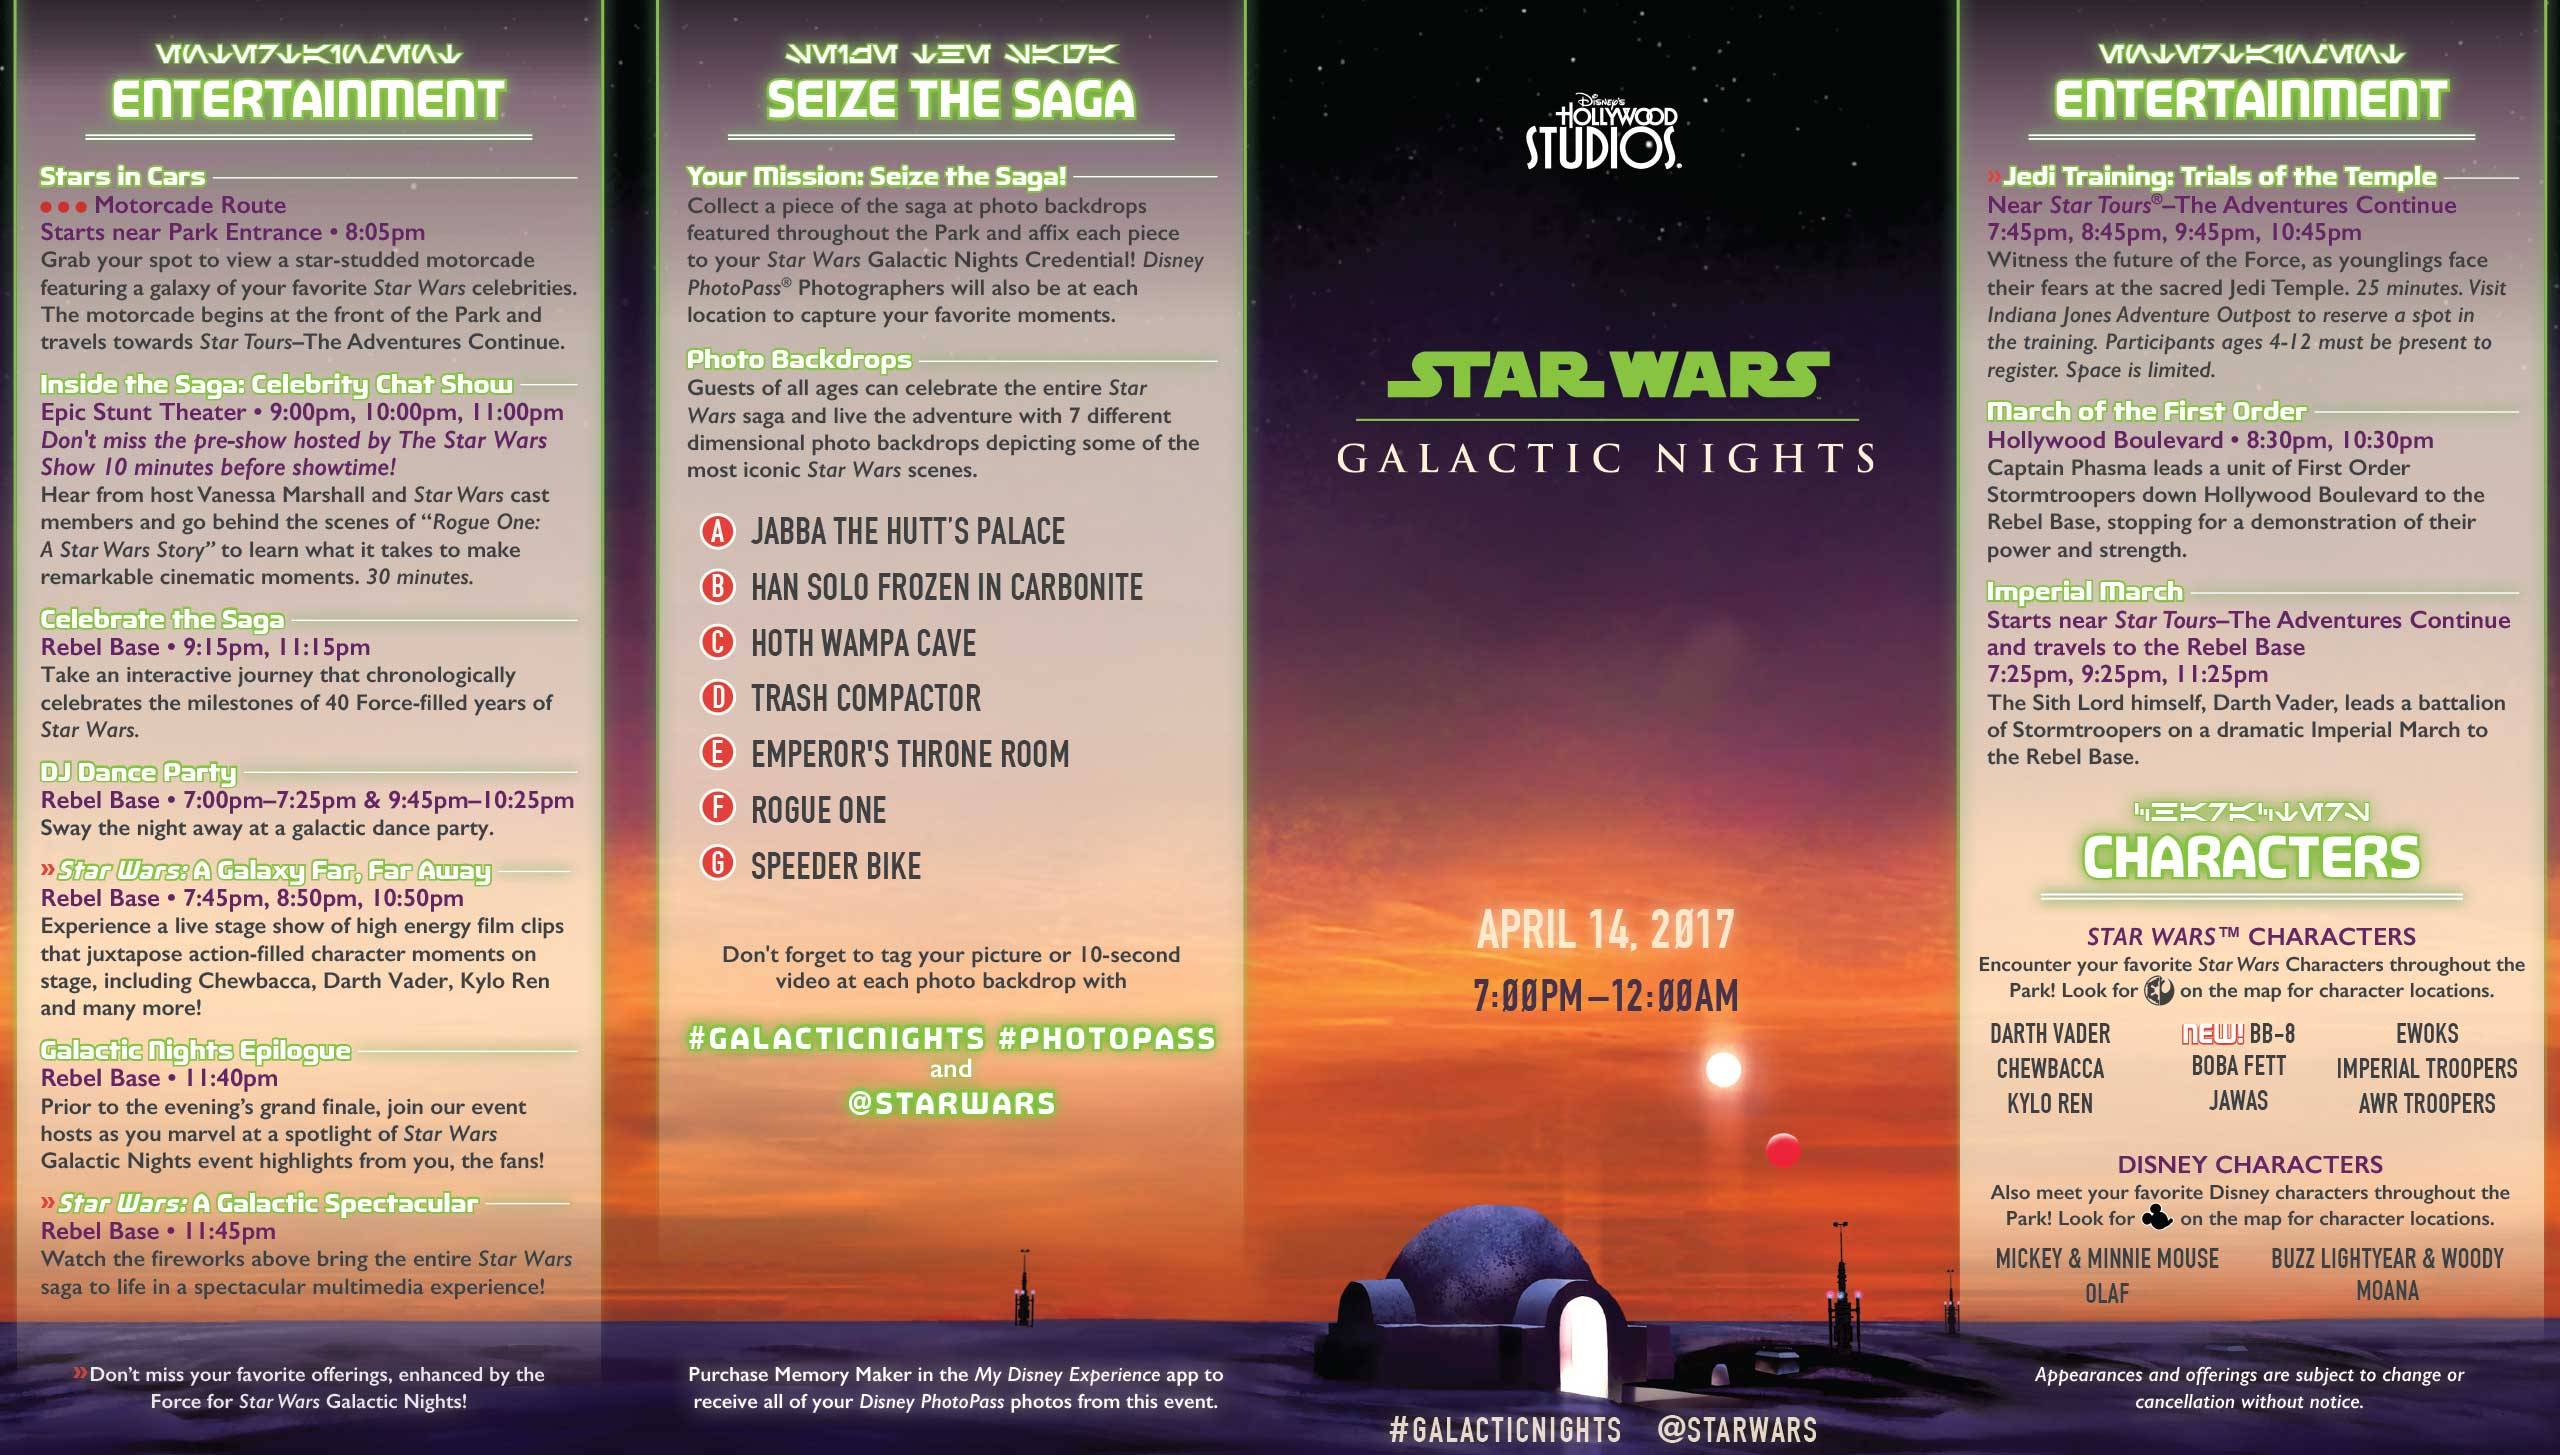 Star Wars Galactic Nights guide map - Front